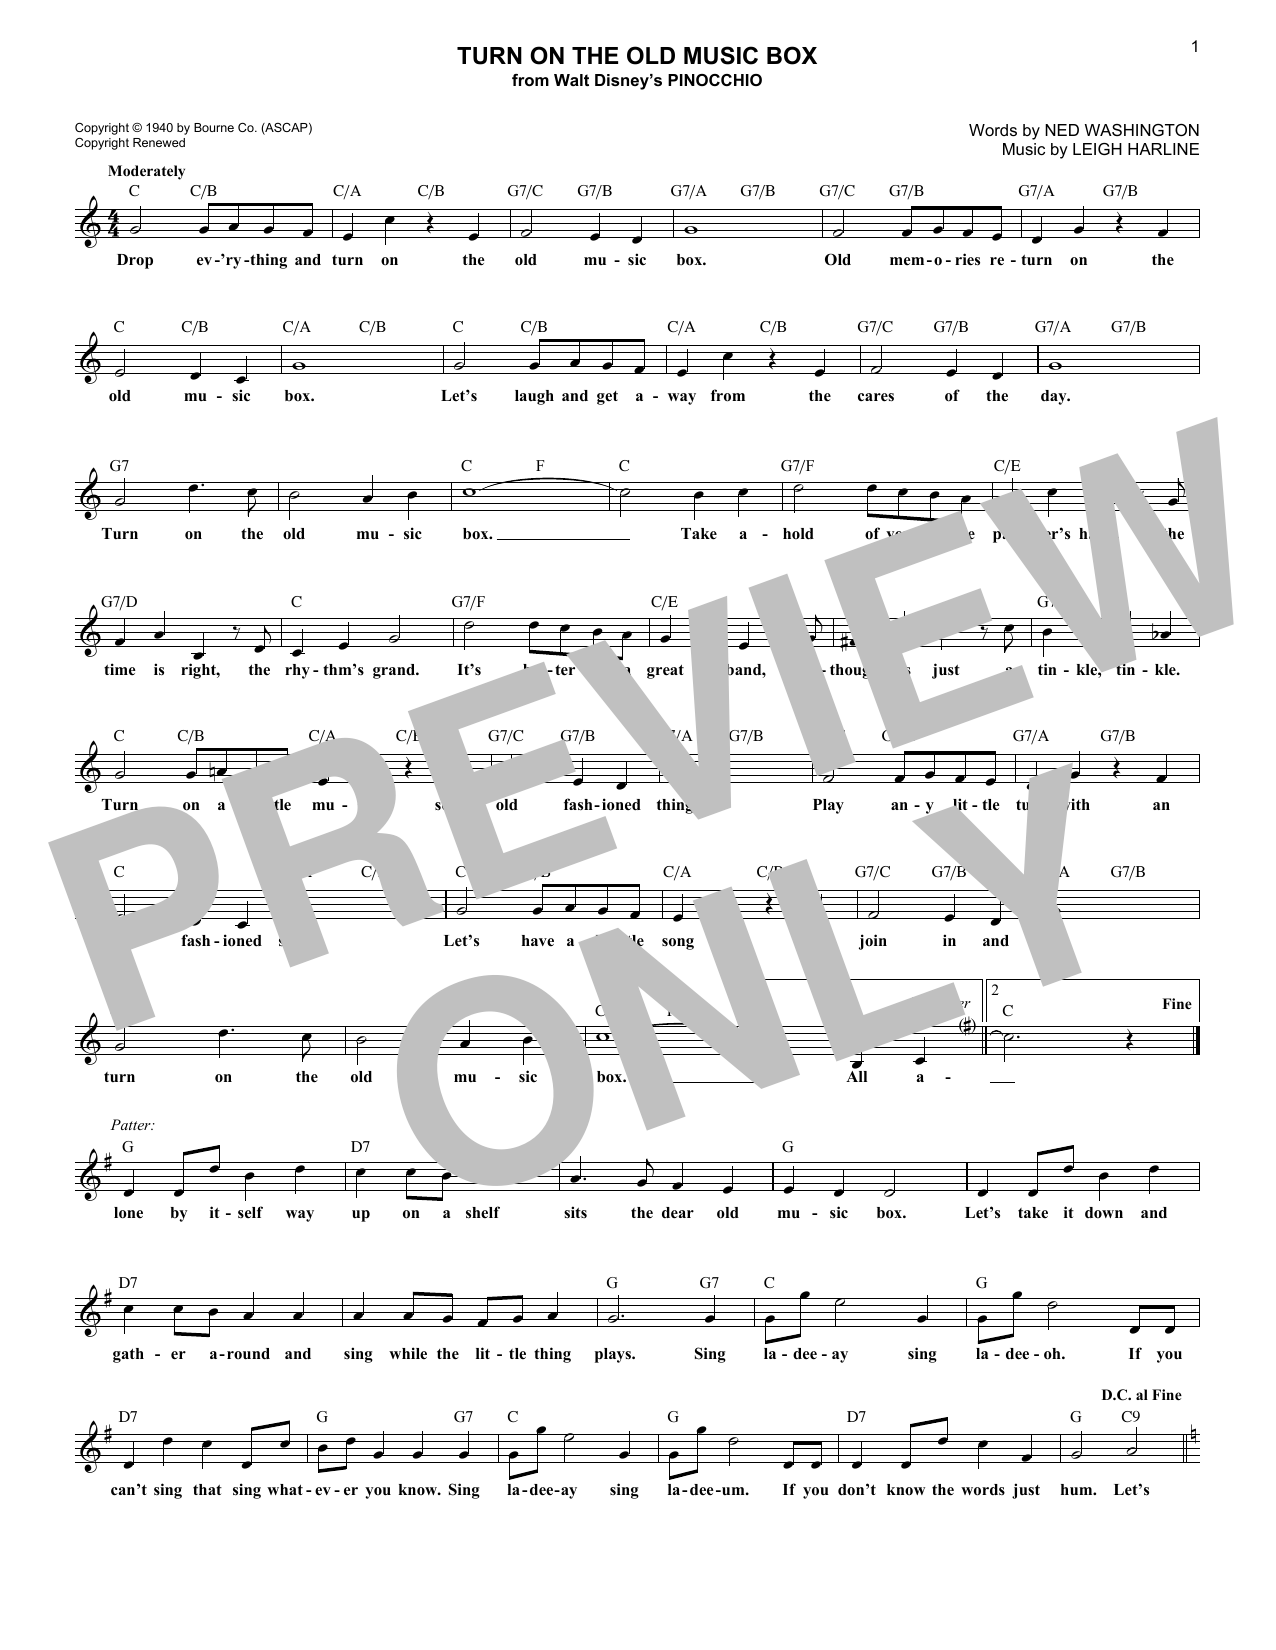 Download Leigh Harline Turn On The Old Music Box Sheet Music